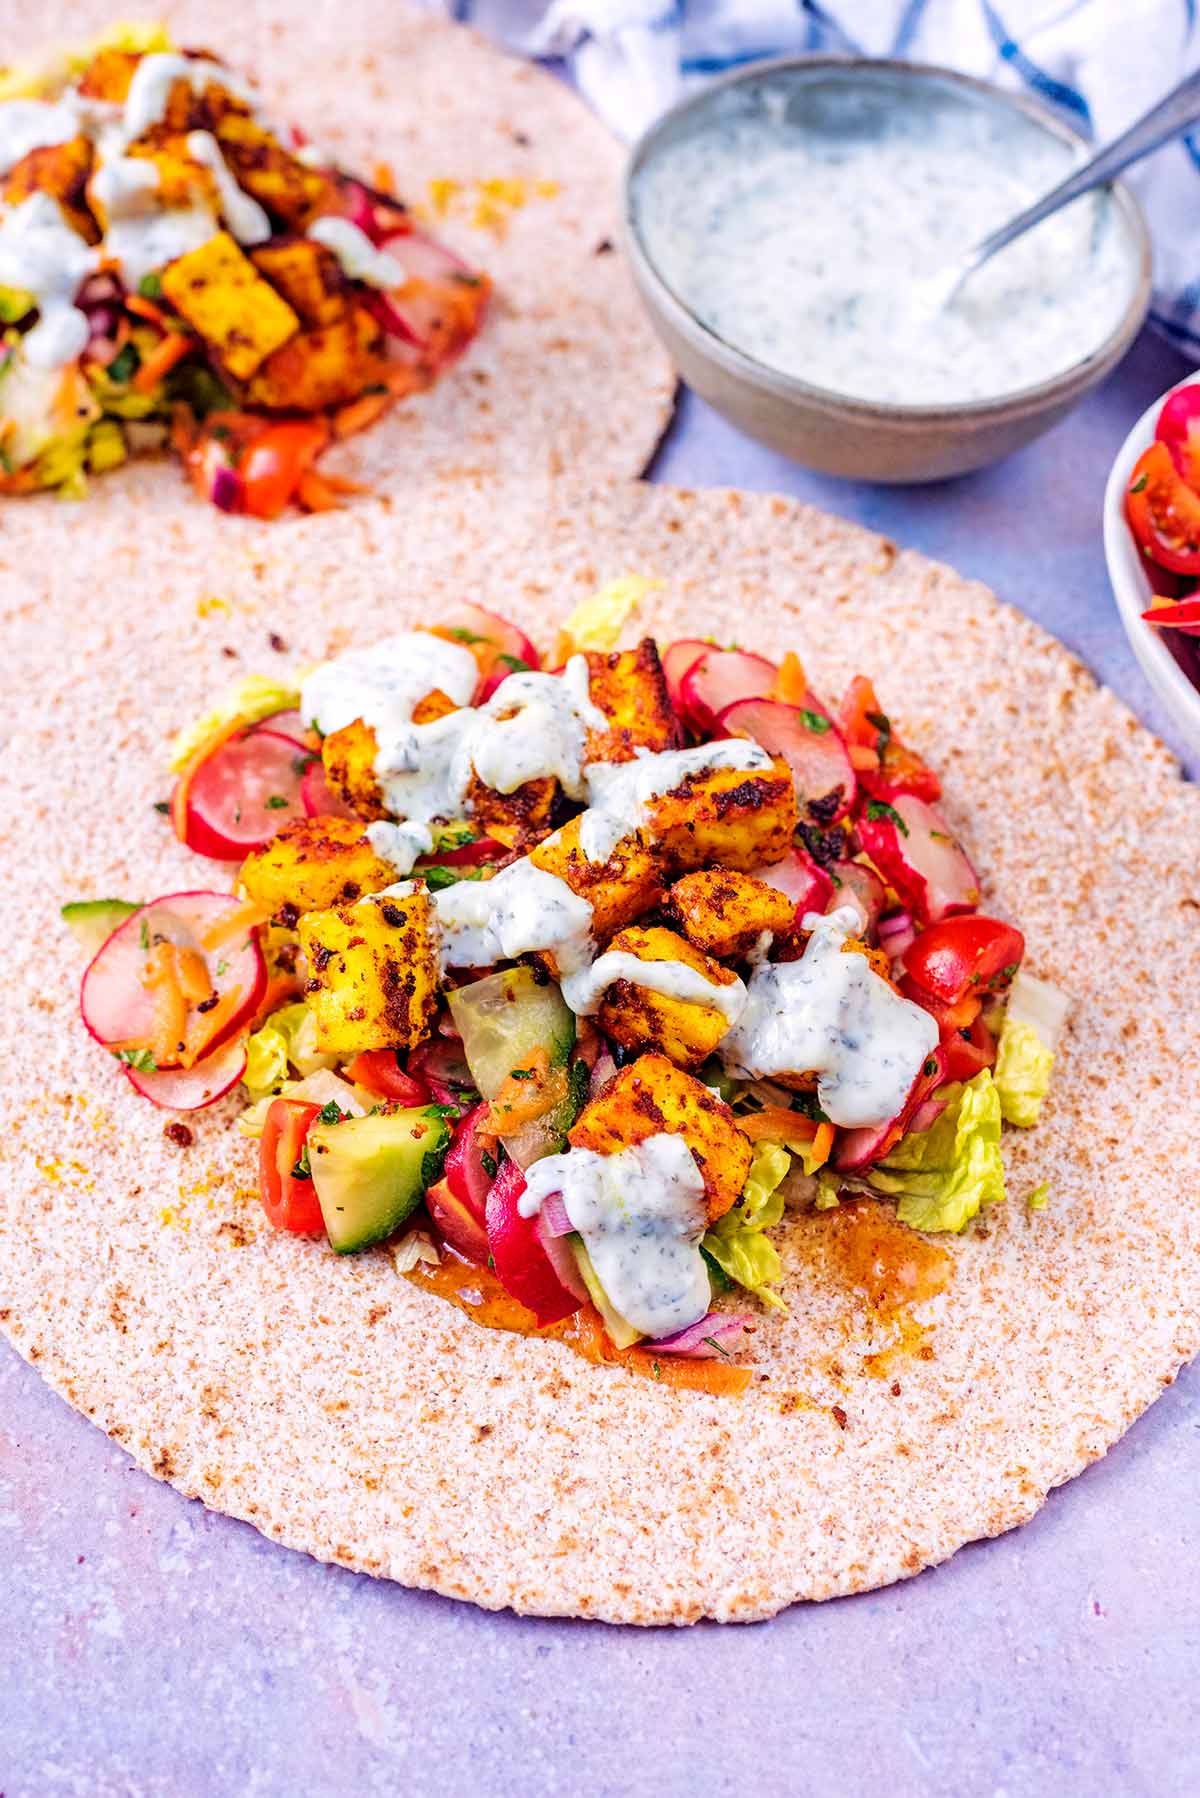 A paneer wrap in front of a bowl of mint yogurt.